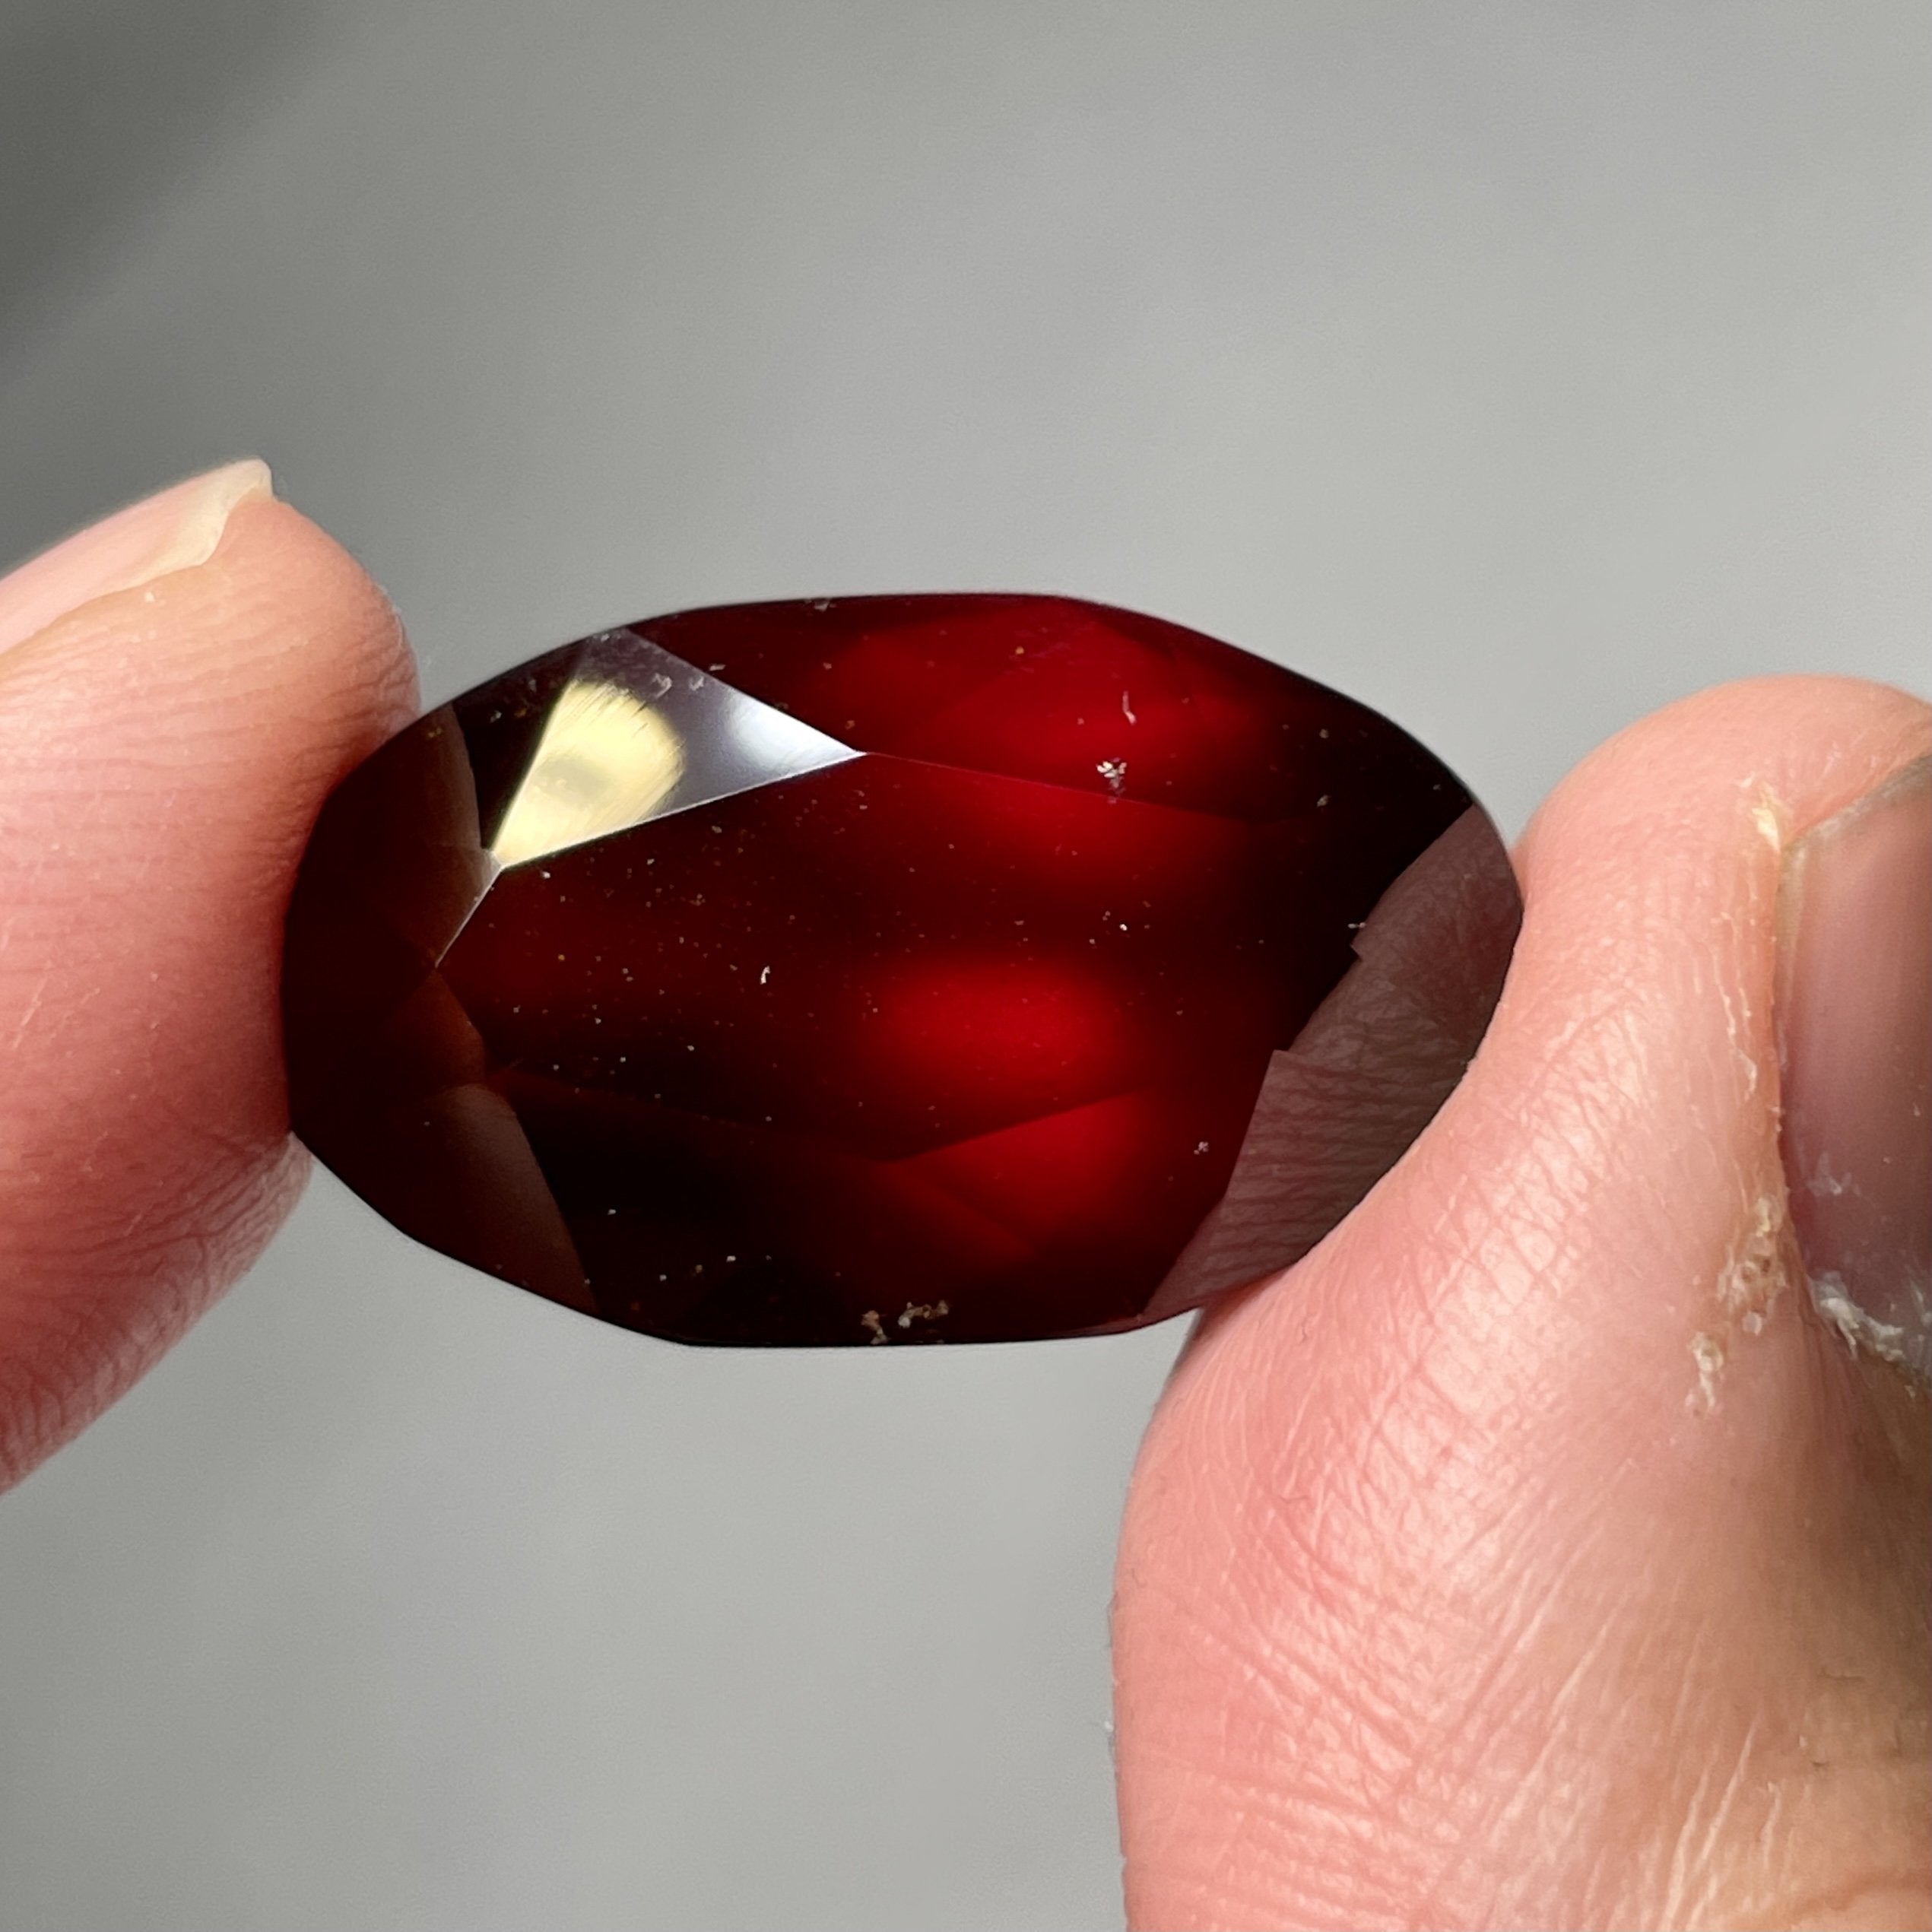 36.49Ct Hessonite Garnet Tanzania Untreated Unheated. 25.2X 14.6 X 11 Mm Use Either Side.